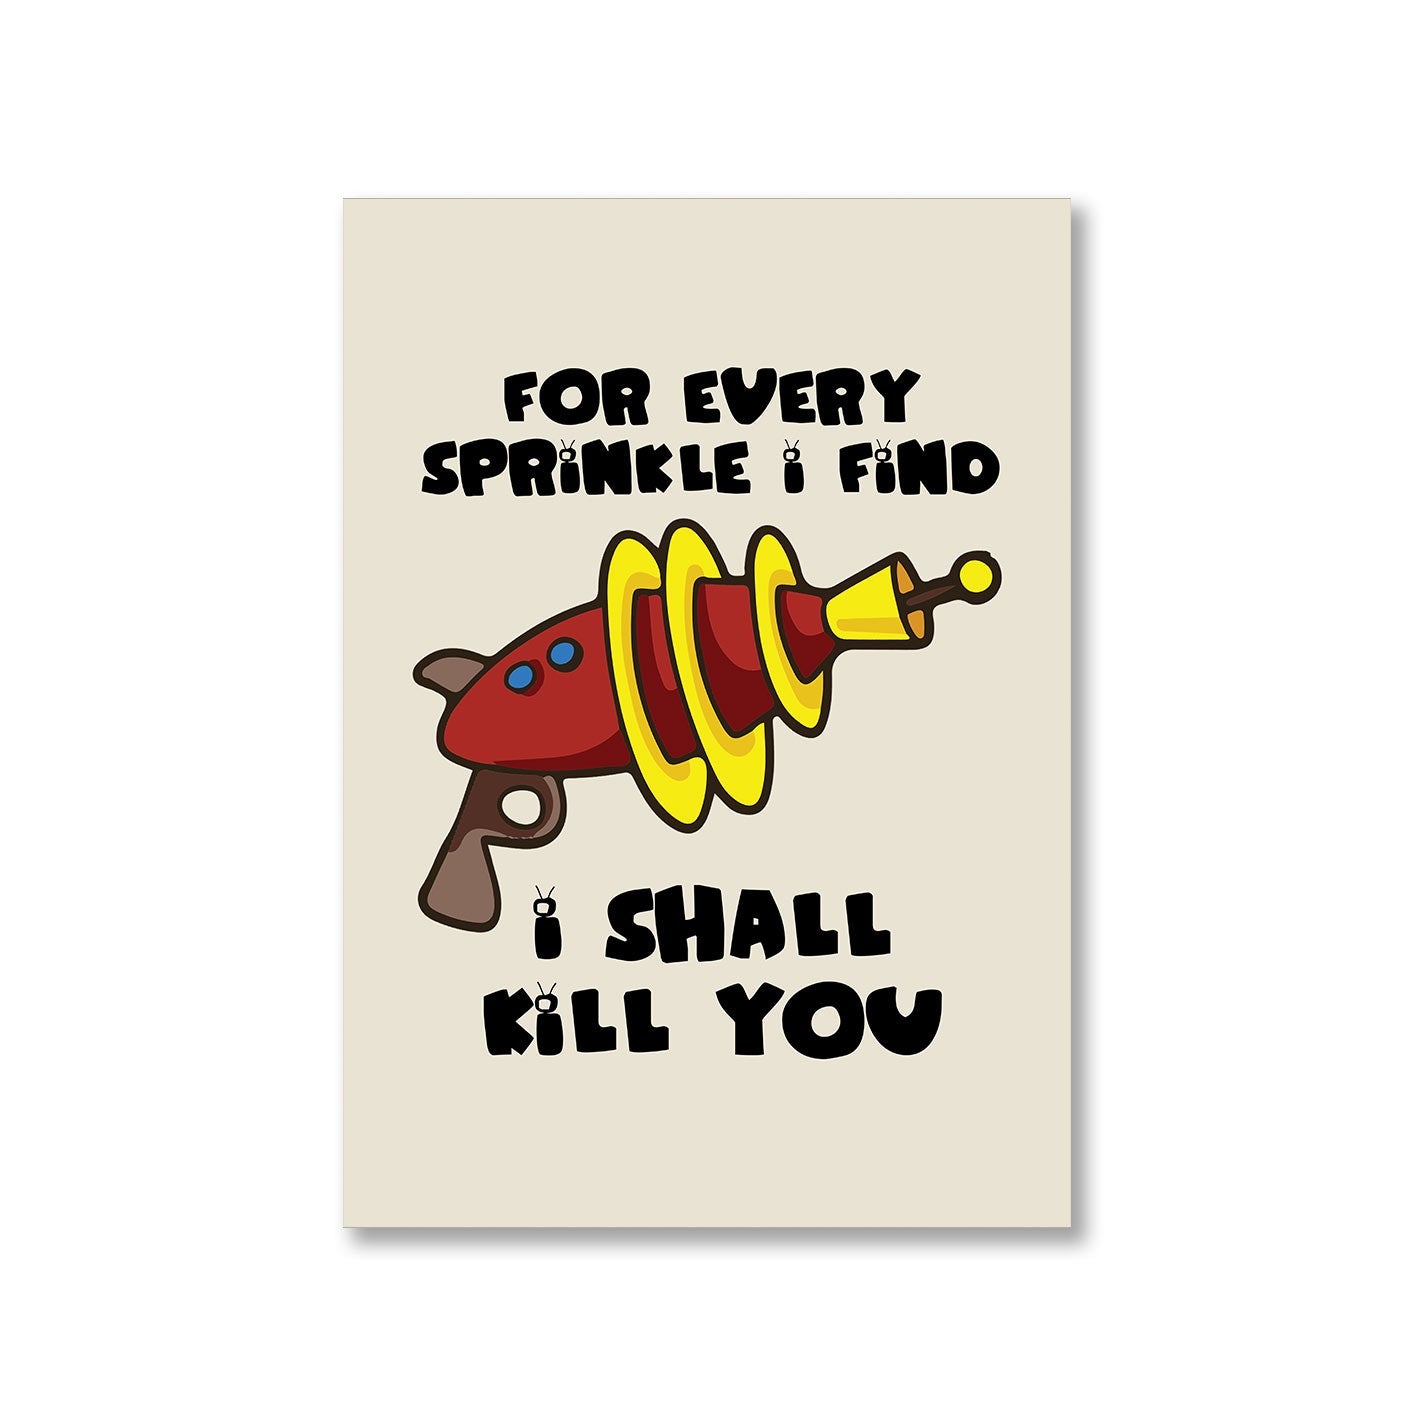 family guy i shall kill you poster wall art buy online united states of america usa the banyan tee tbt a4 - stewie griffin dialogue